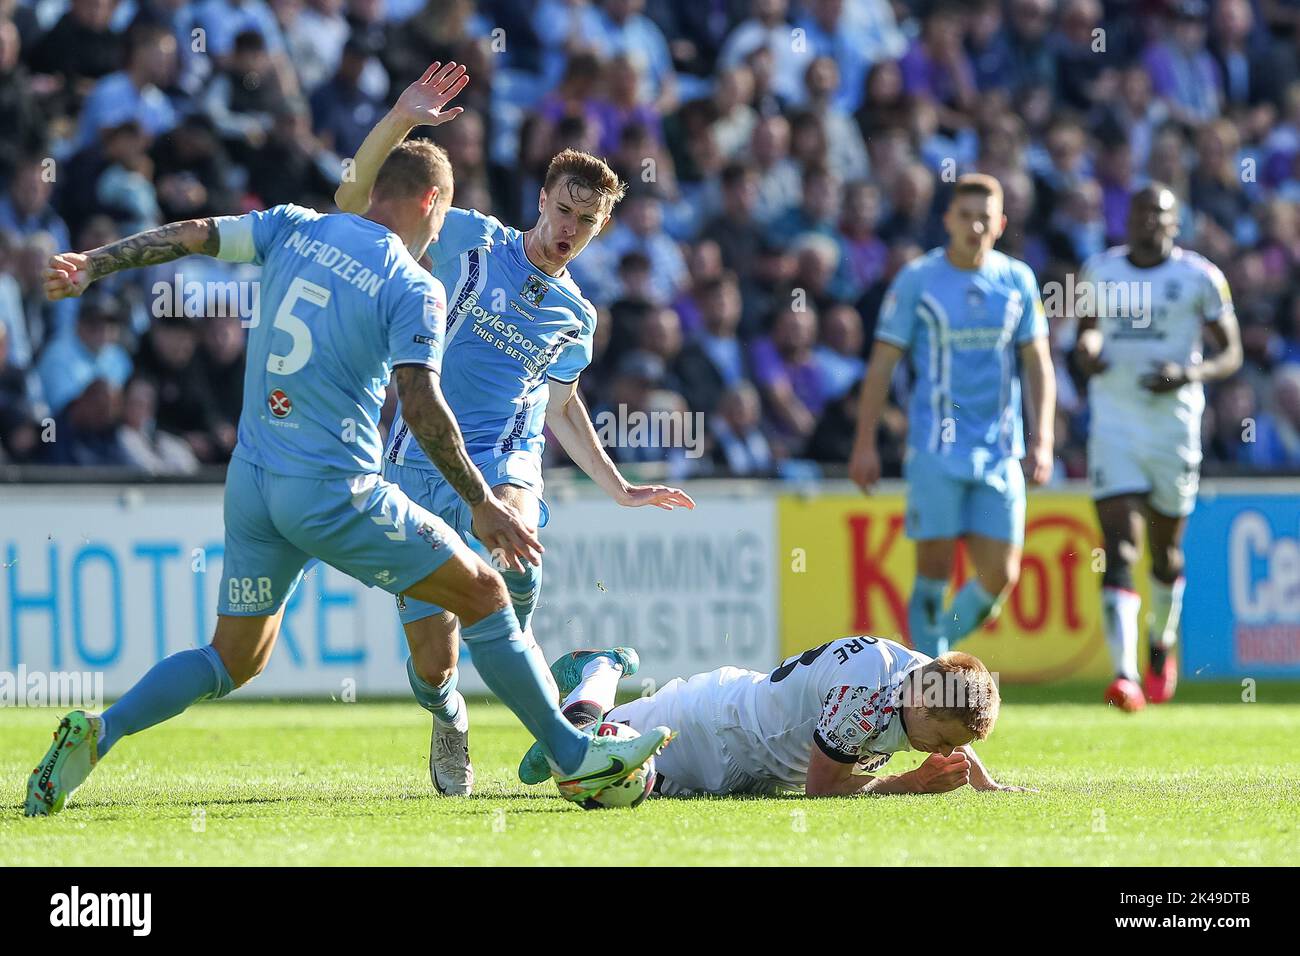 Ben Sheaf #14 of Coventry City fouls Duncan Watmore #18 of Middlesbrough during the Sky Bet Championship match Coventry City vs Middlesbrough at Coventry Building Society Arena, Coventry, United Kingdom, 1st October 2022  (Photo by Gareth Evans/News Images) Stock Photo